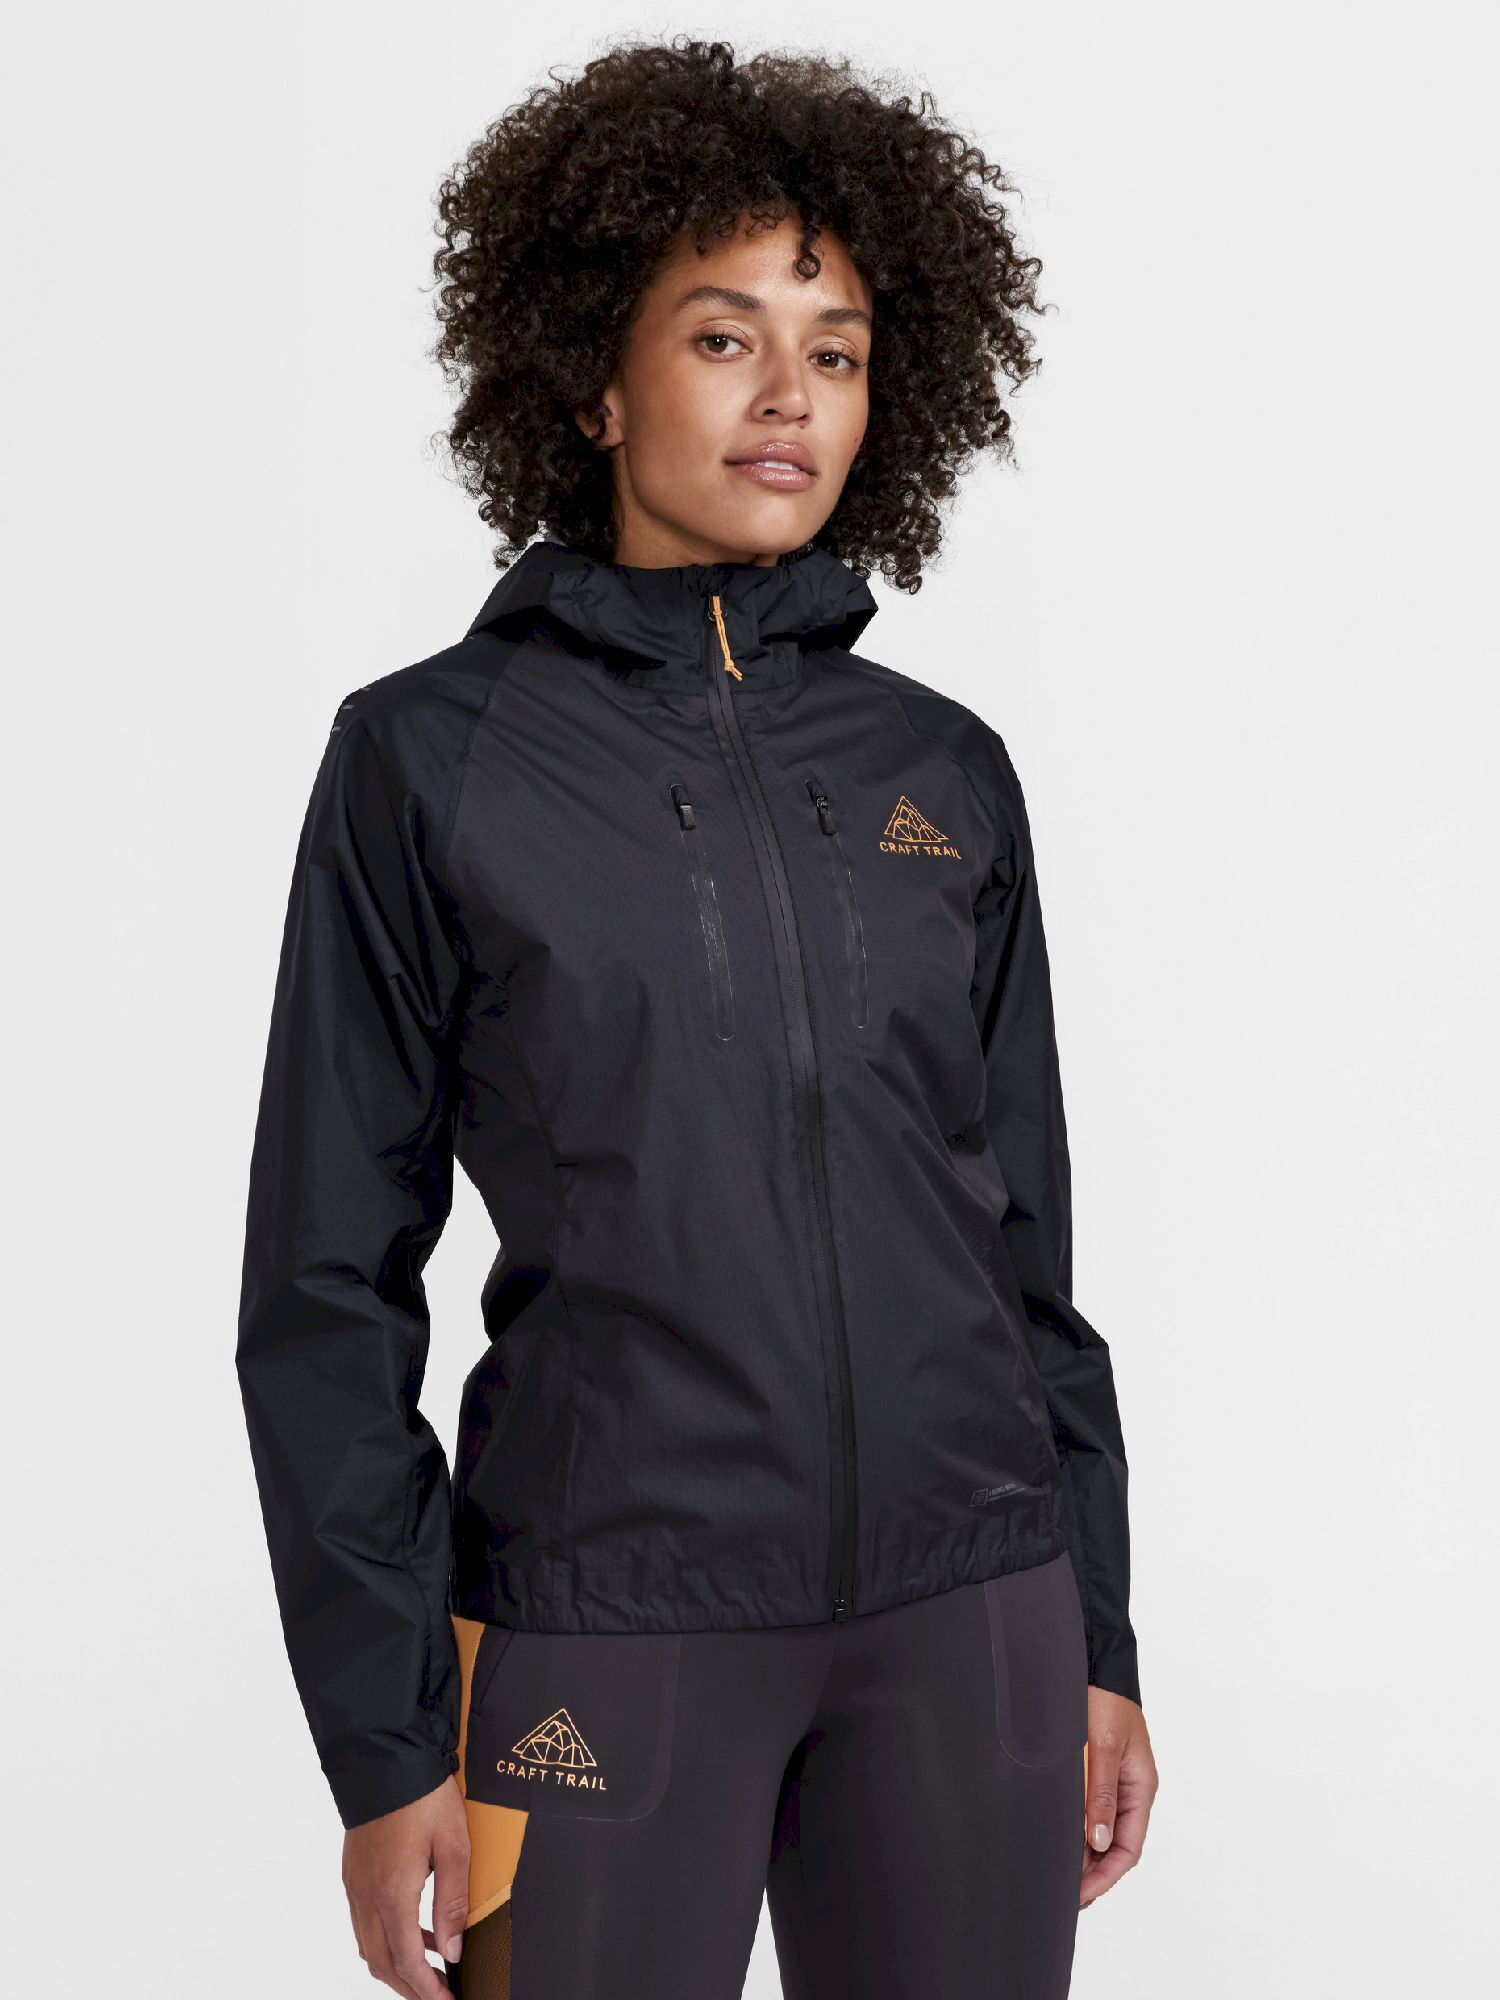 Craft Pro Trail 2L Light Weight Jacket - Giacca antipioggia - Donna | Hardloop